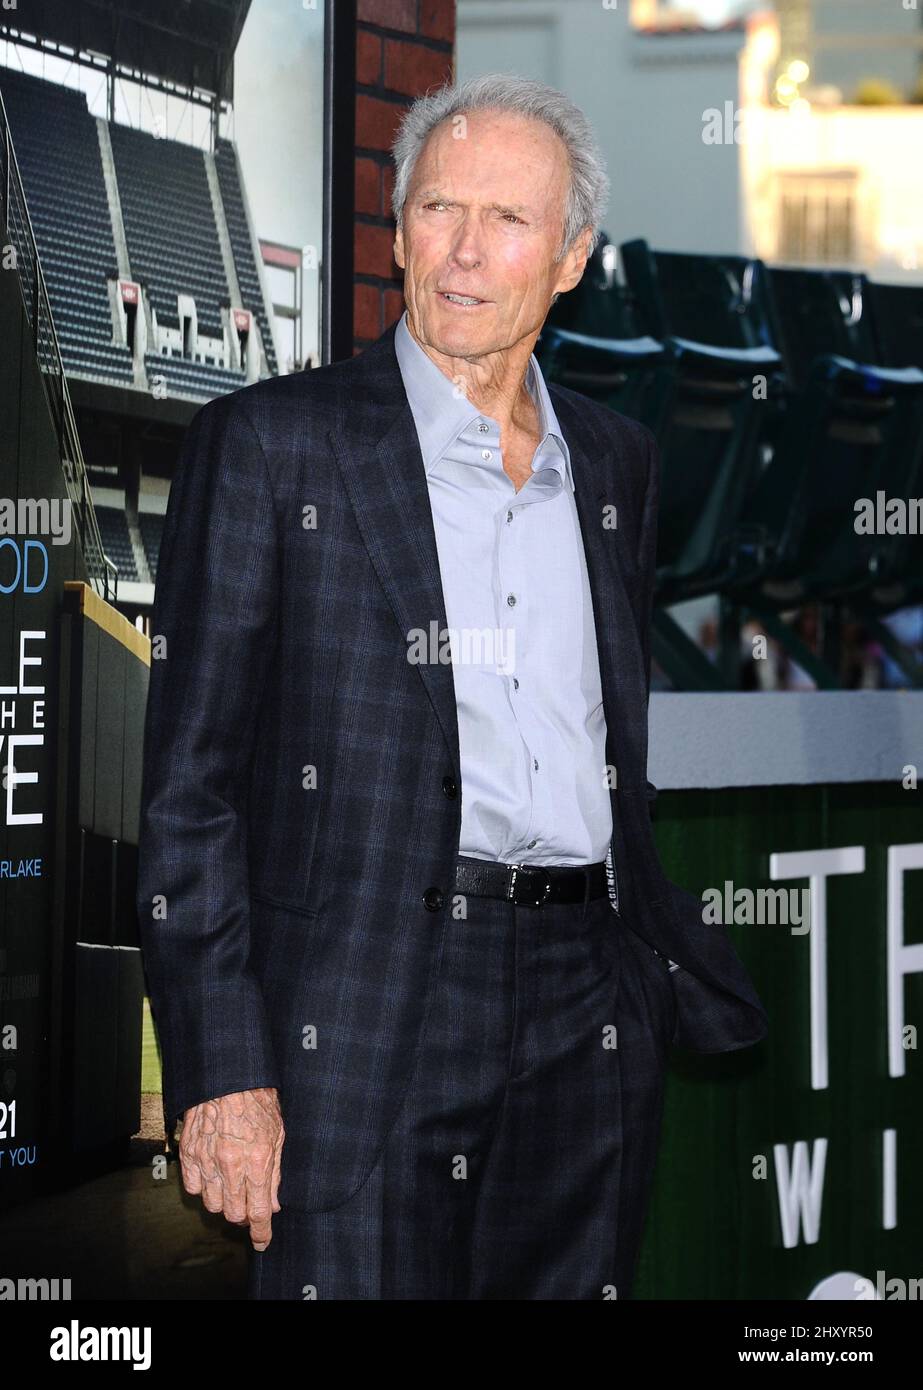 Clint Eastwood bei der Premiere von „Trouble With The Curve“ in Los Angeles. Stockfoto